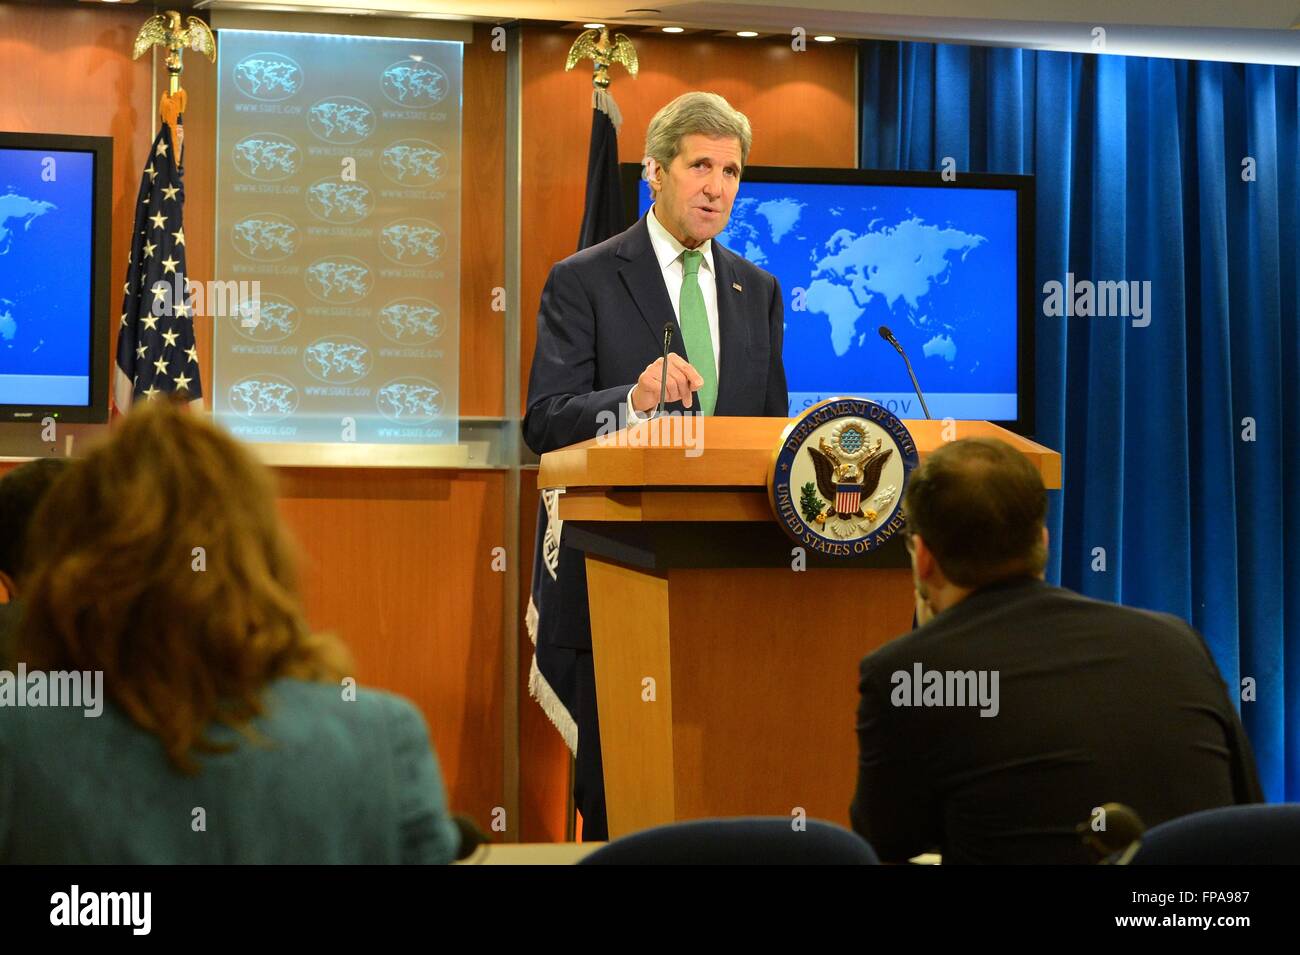 U.S Secretary of State John Kerry during a press conference at the State Department March 17, 2016 in Washington, D.C. Kerry said that the Islamic State is committing genocide against Christians and other minorities in Iraq and Syria. Stock Photo